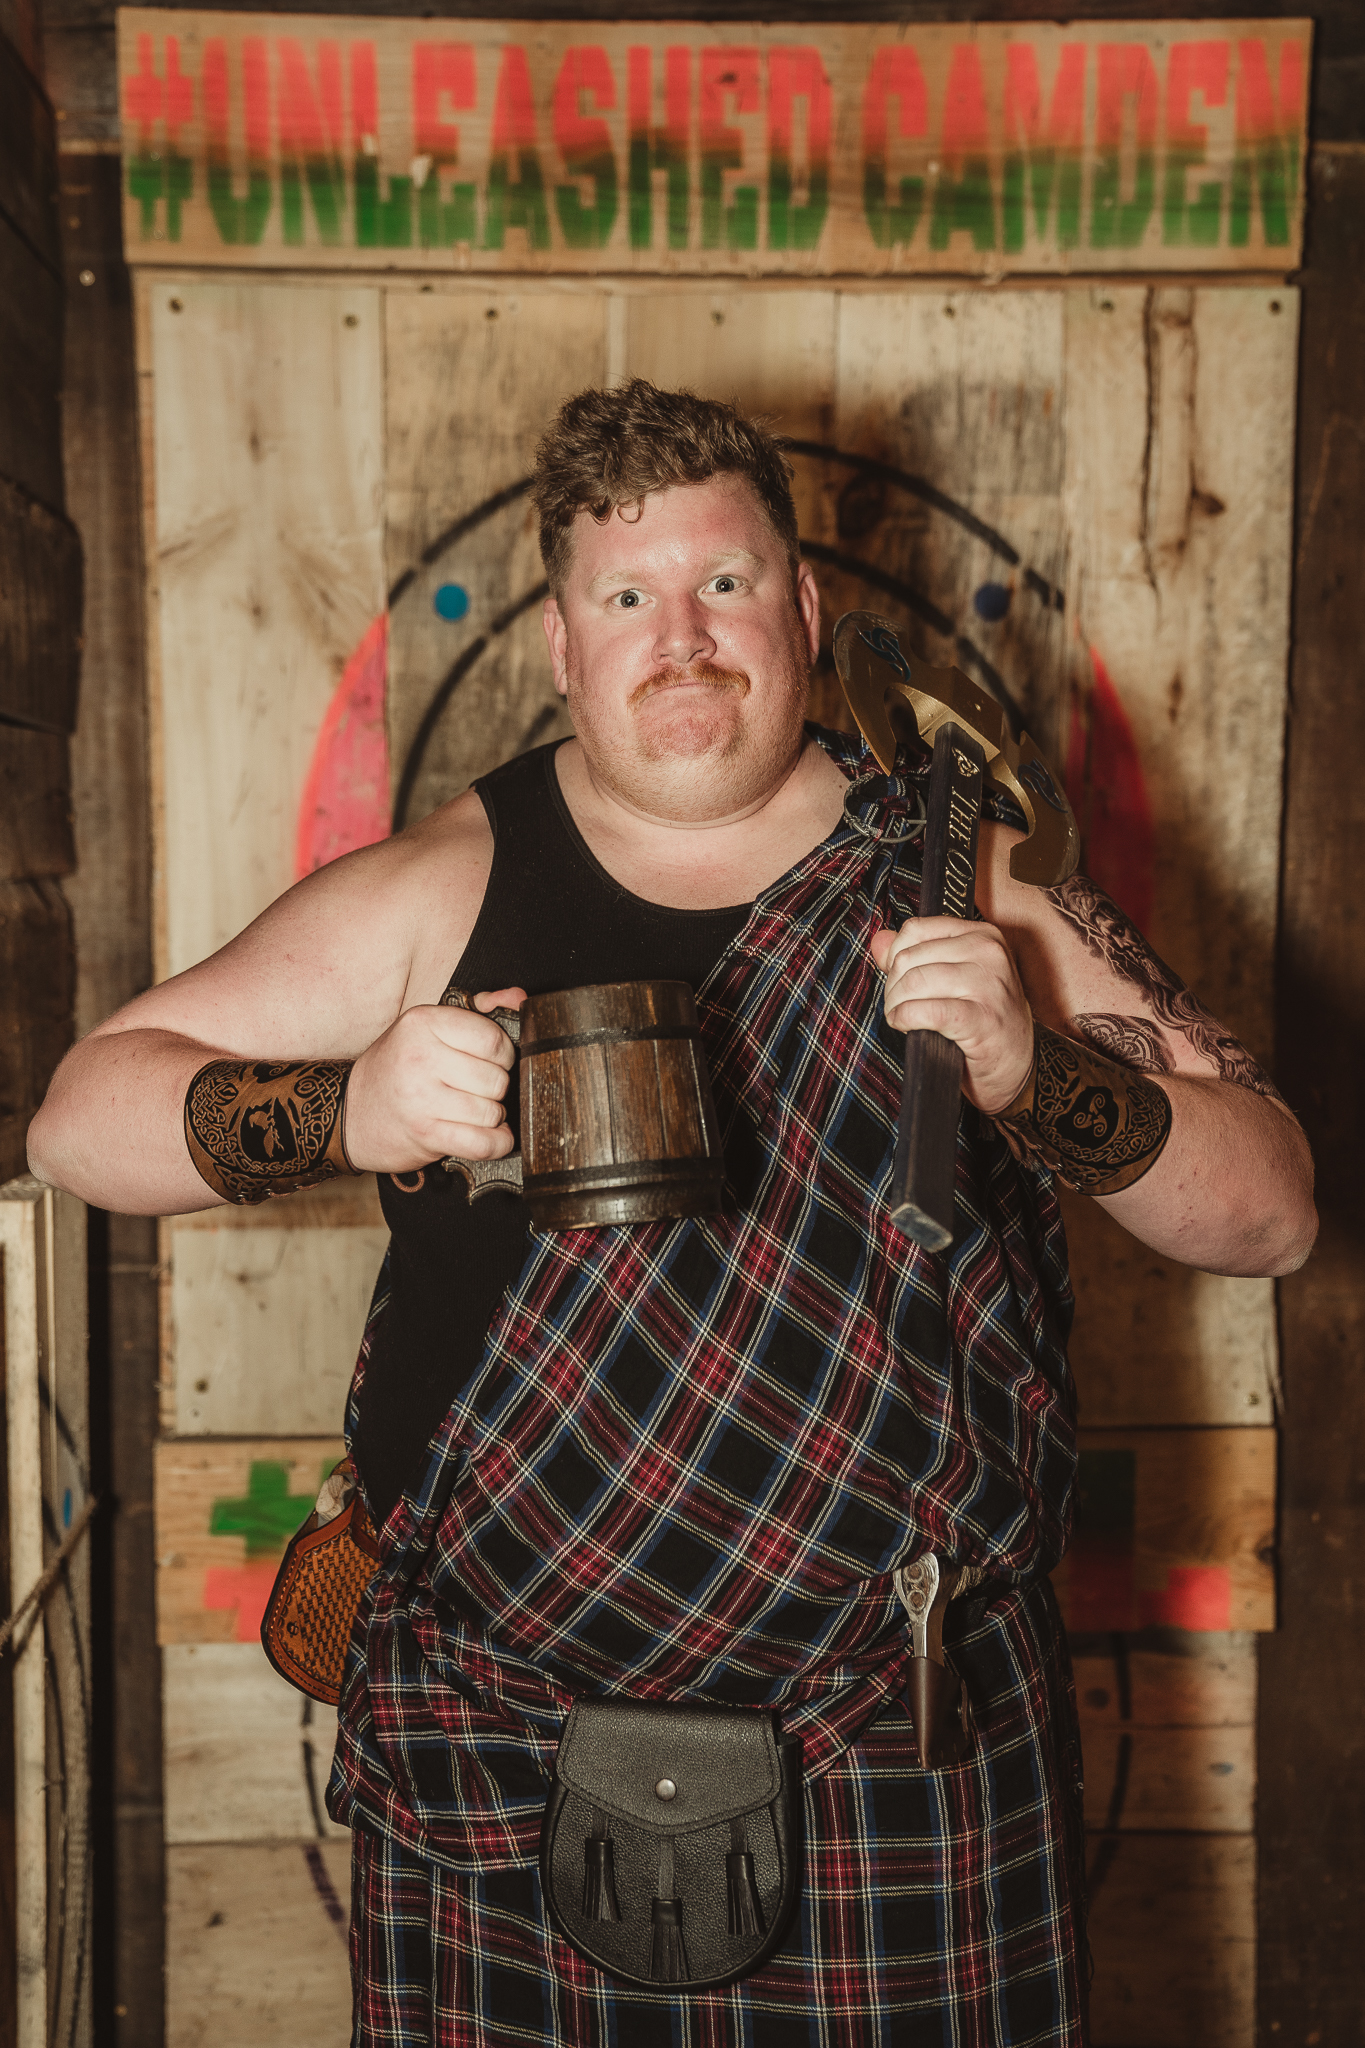 Axe throwing League pictures at unleashed camden in Kingsland Georgia